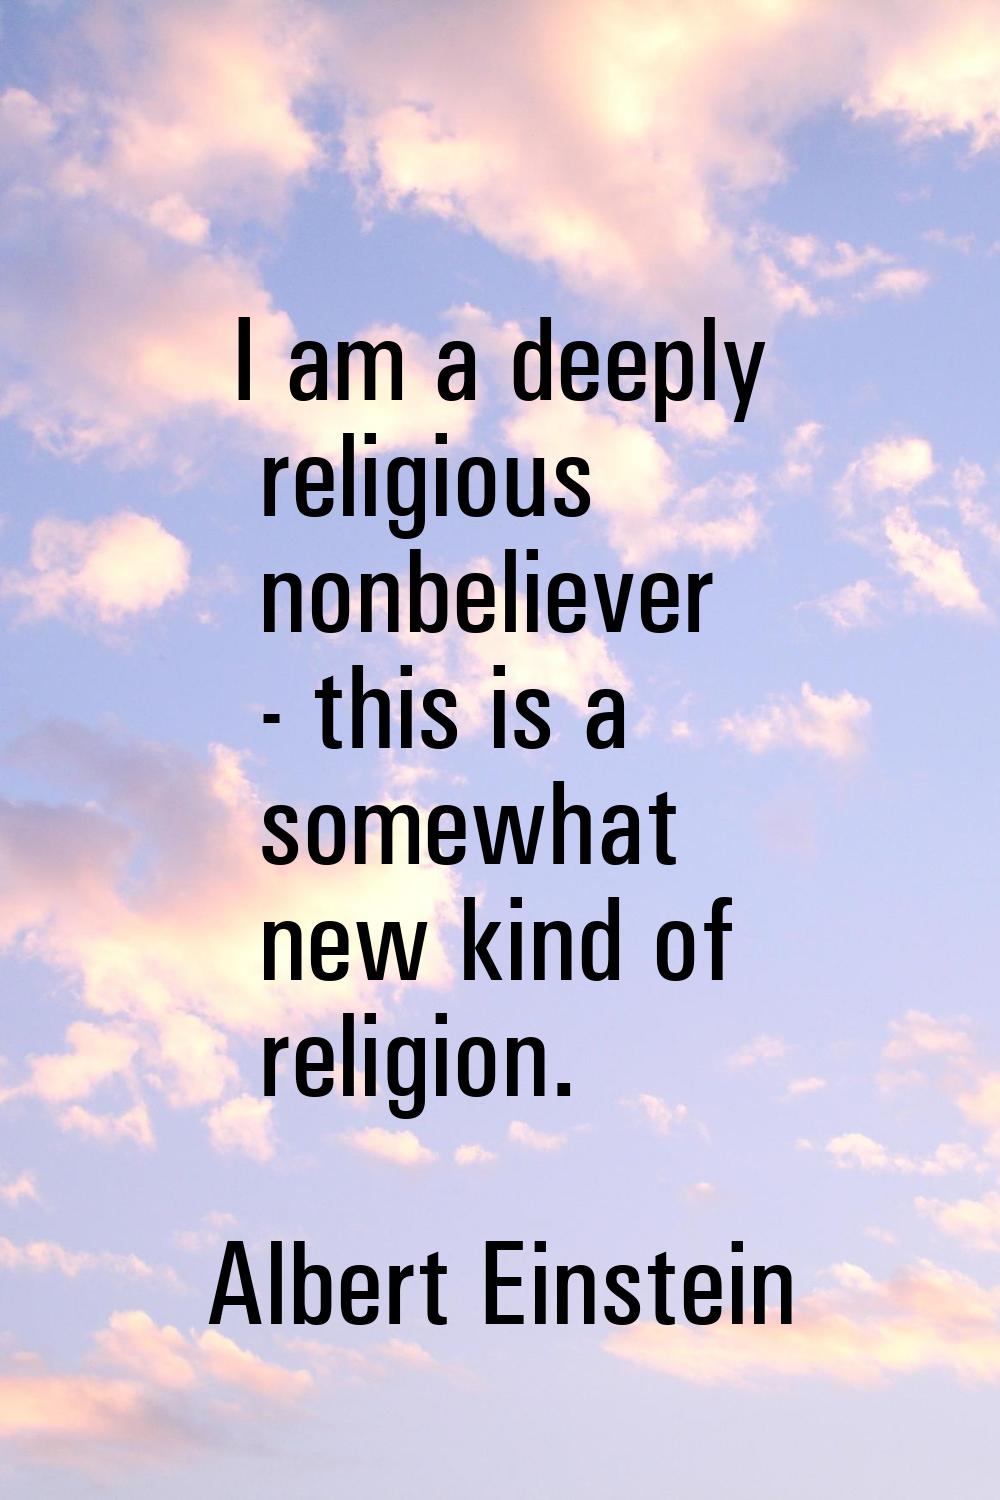 I am a deeply religious nonbeliever - this is a somewhat new kind of religion.